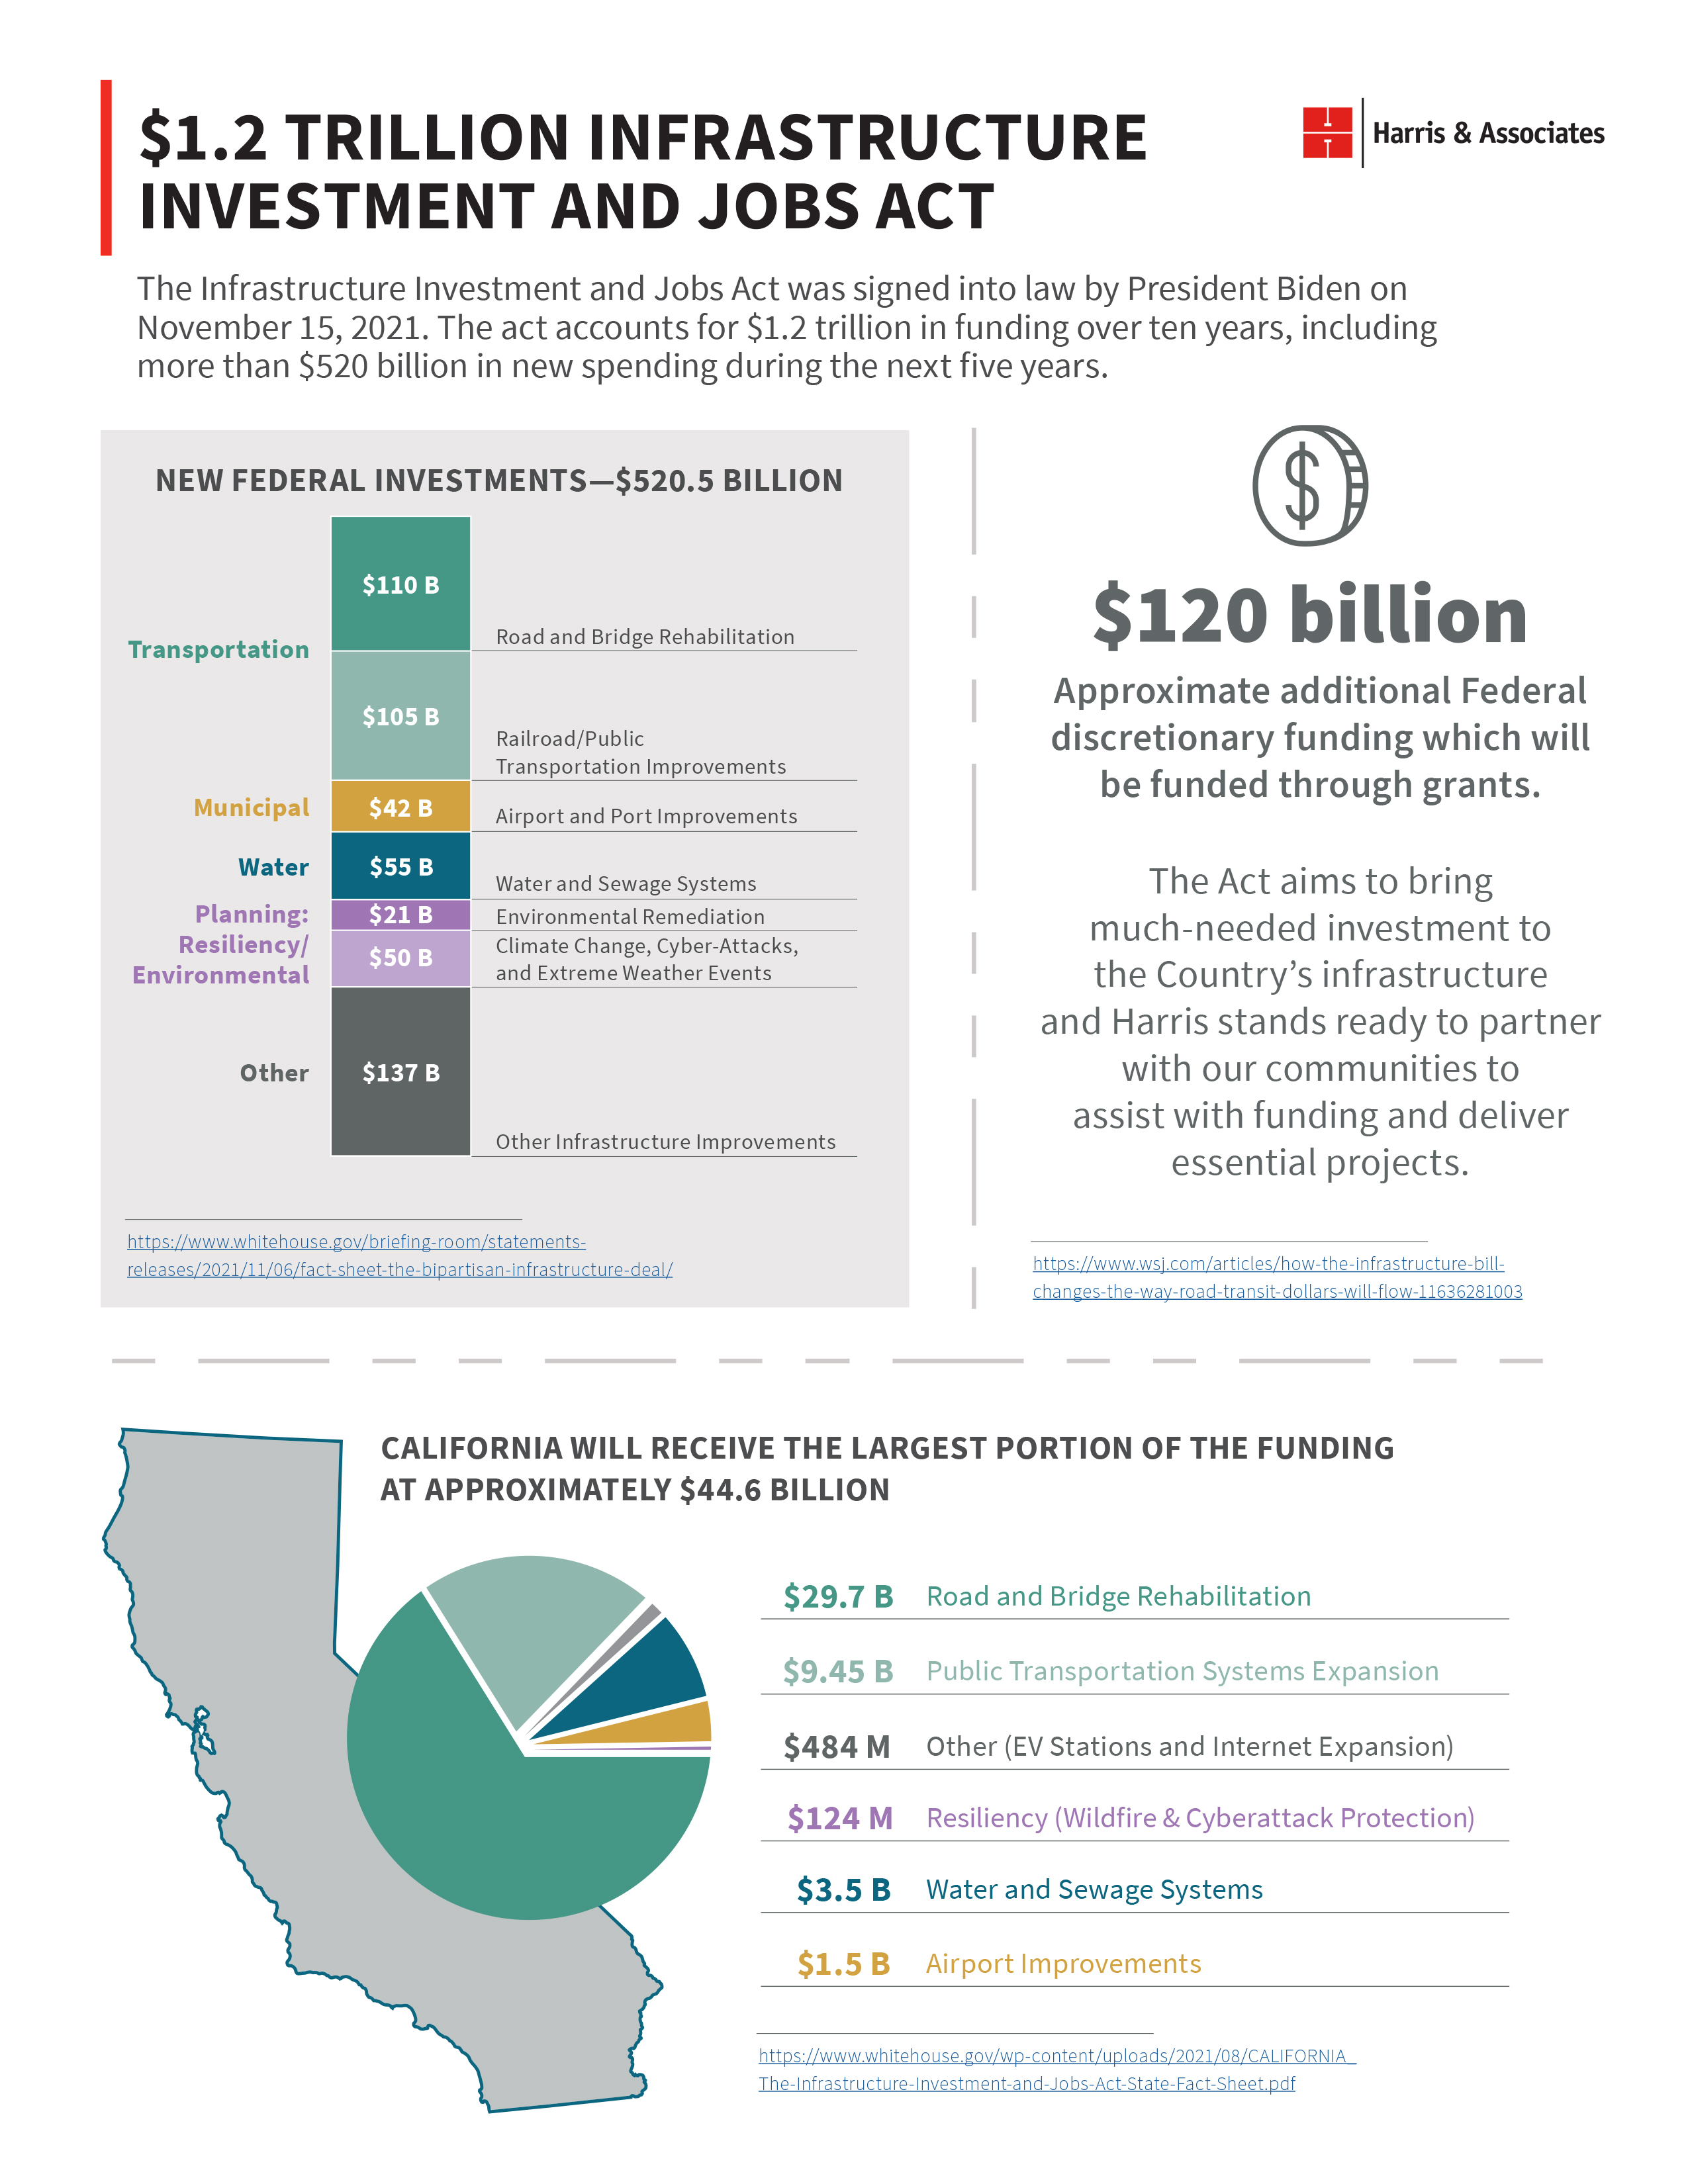 Infrastructure Investment and Jobs Act Infographic